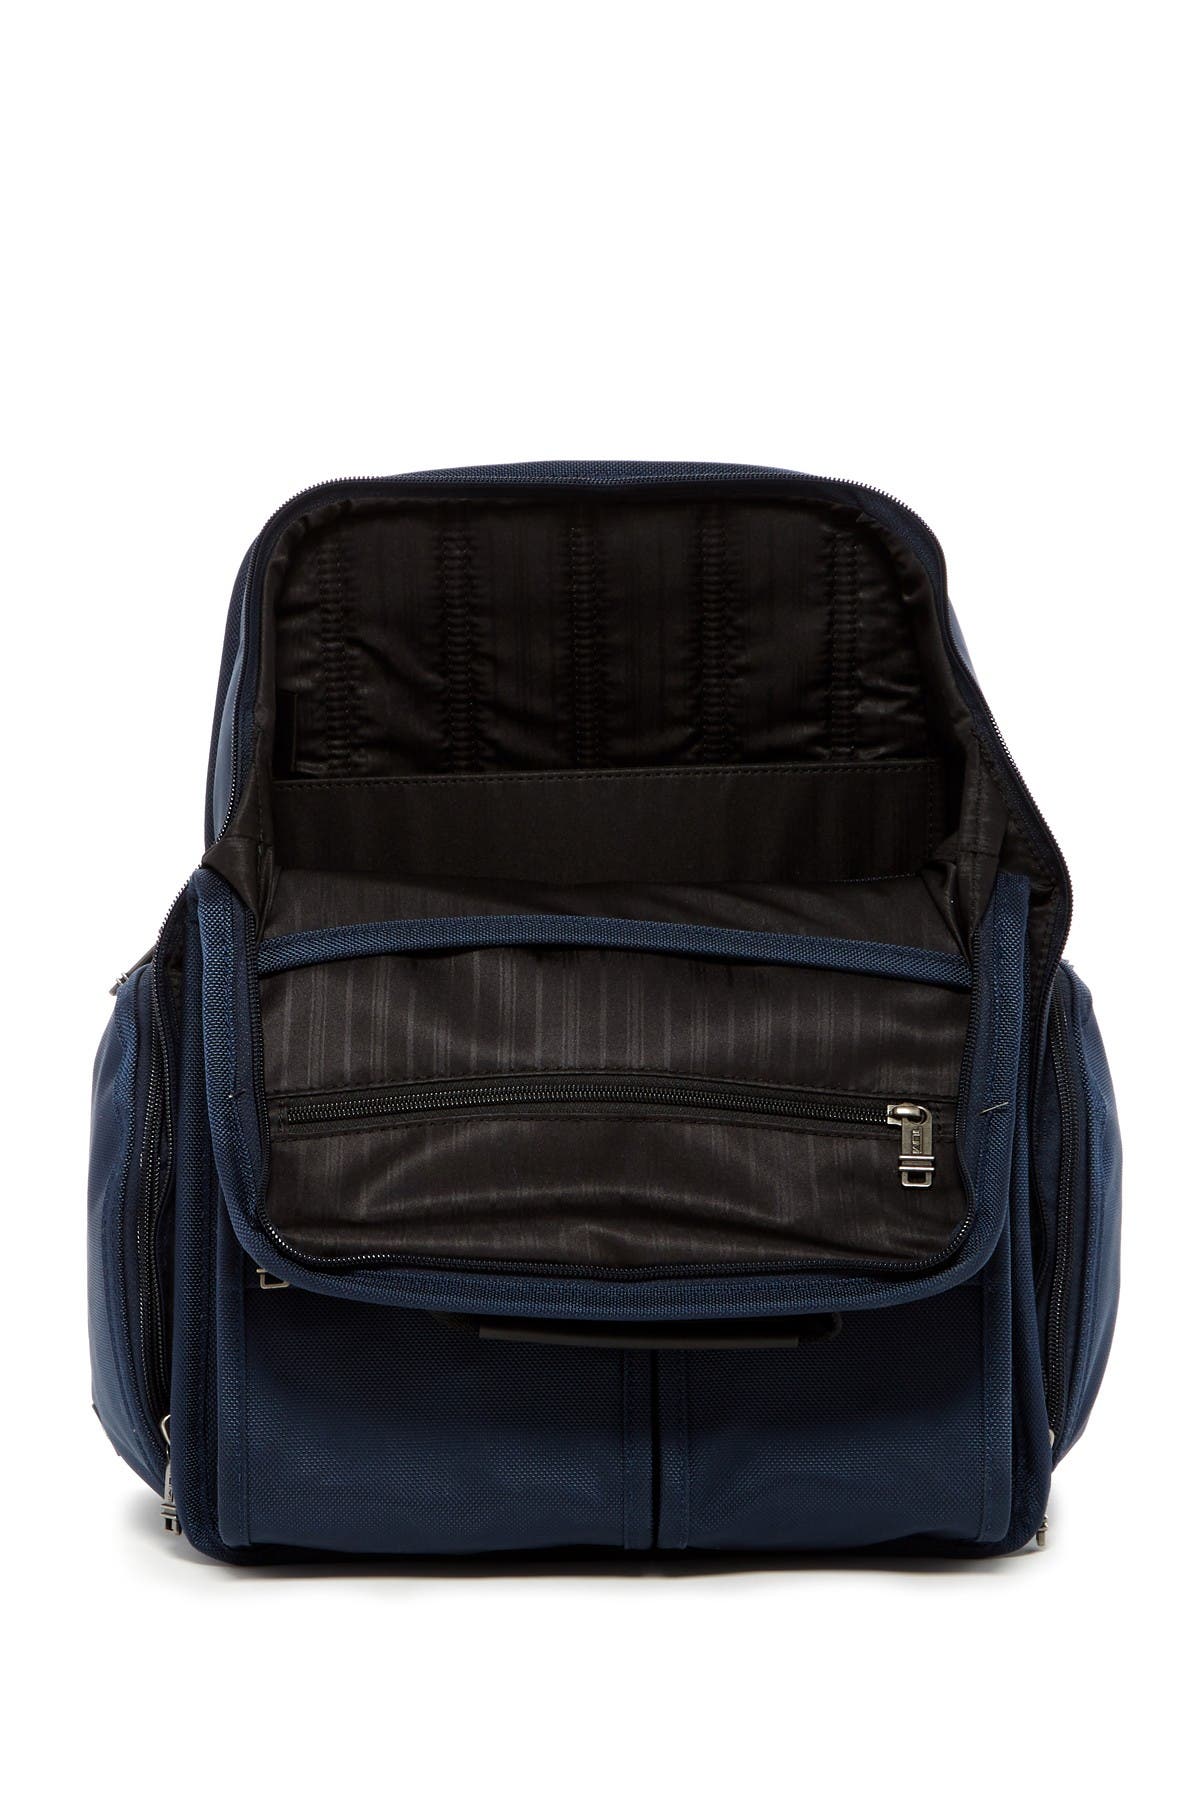 Tumi Compact Nylon Laptop Brief Pack In Navy5